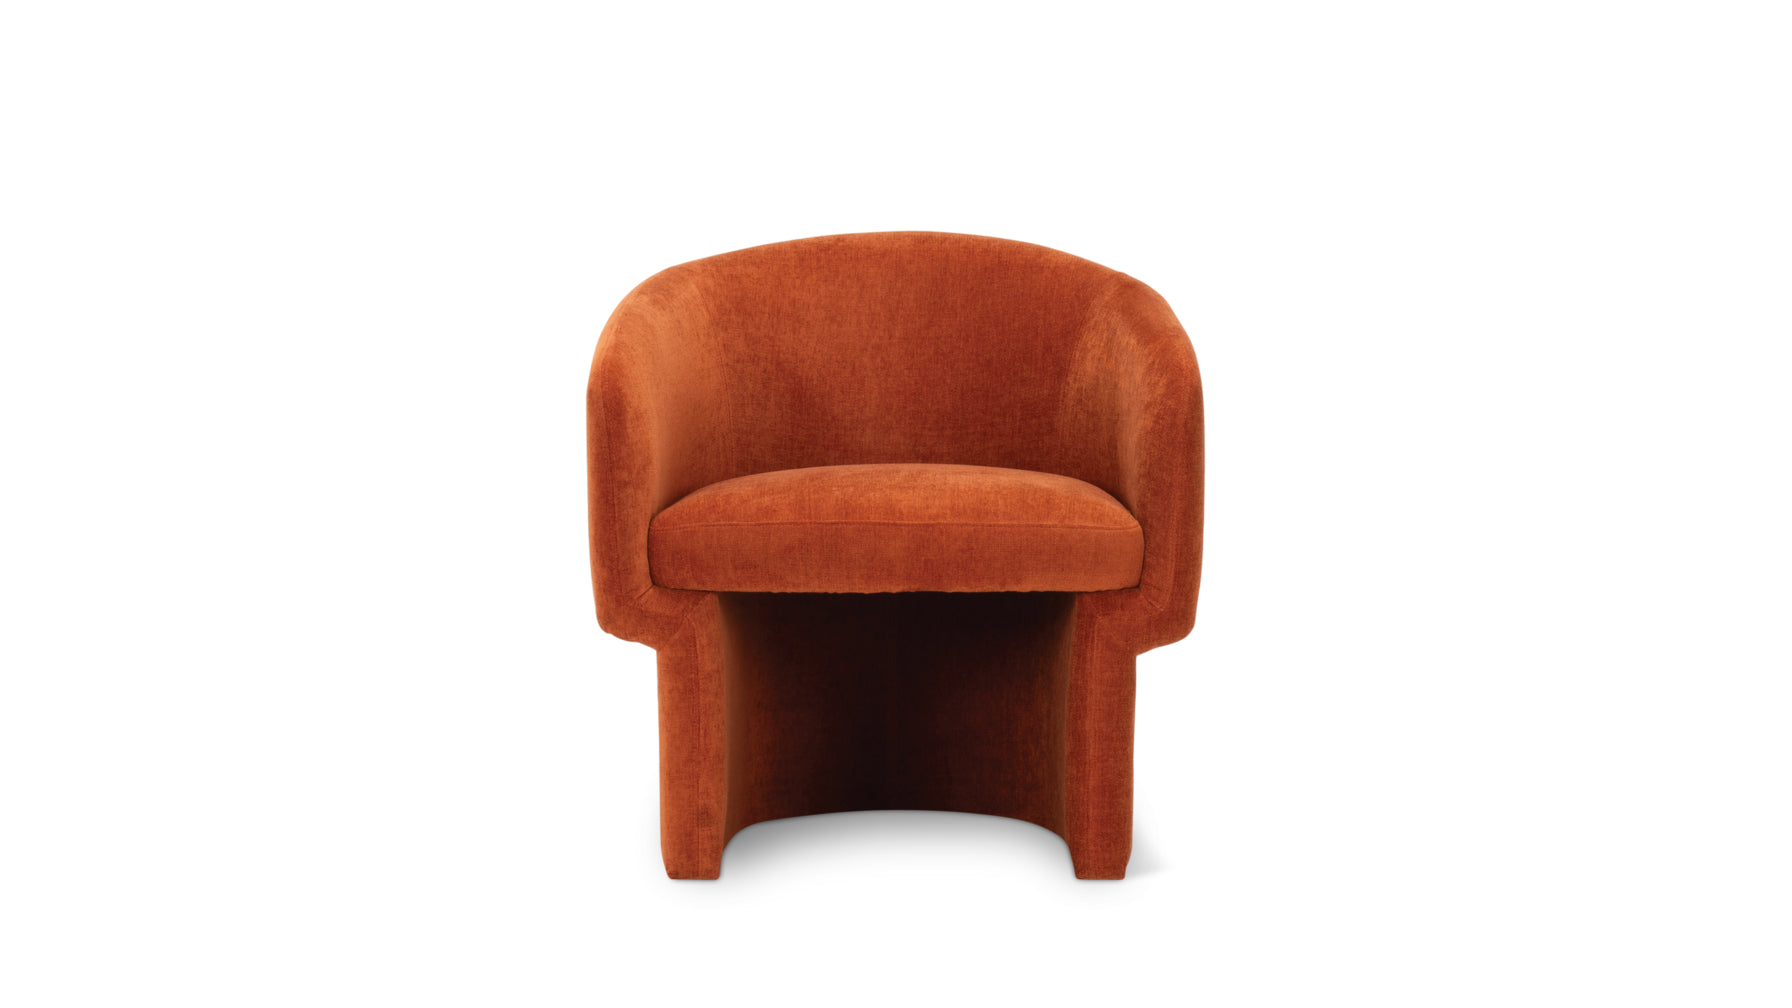 Embrace Lounge Chair, Harvest - Image 1